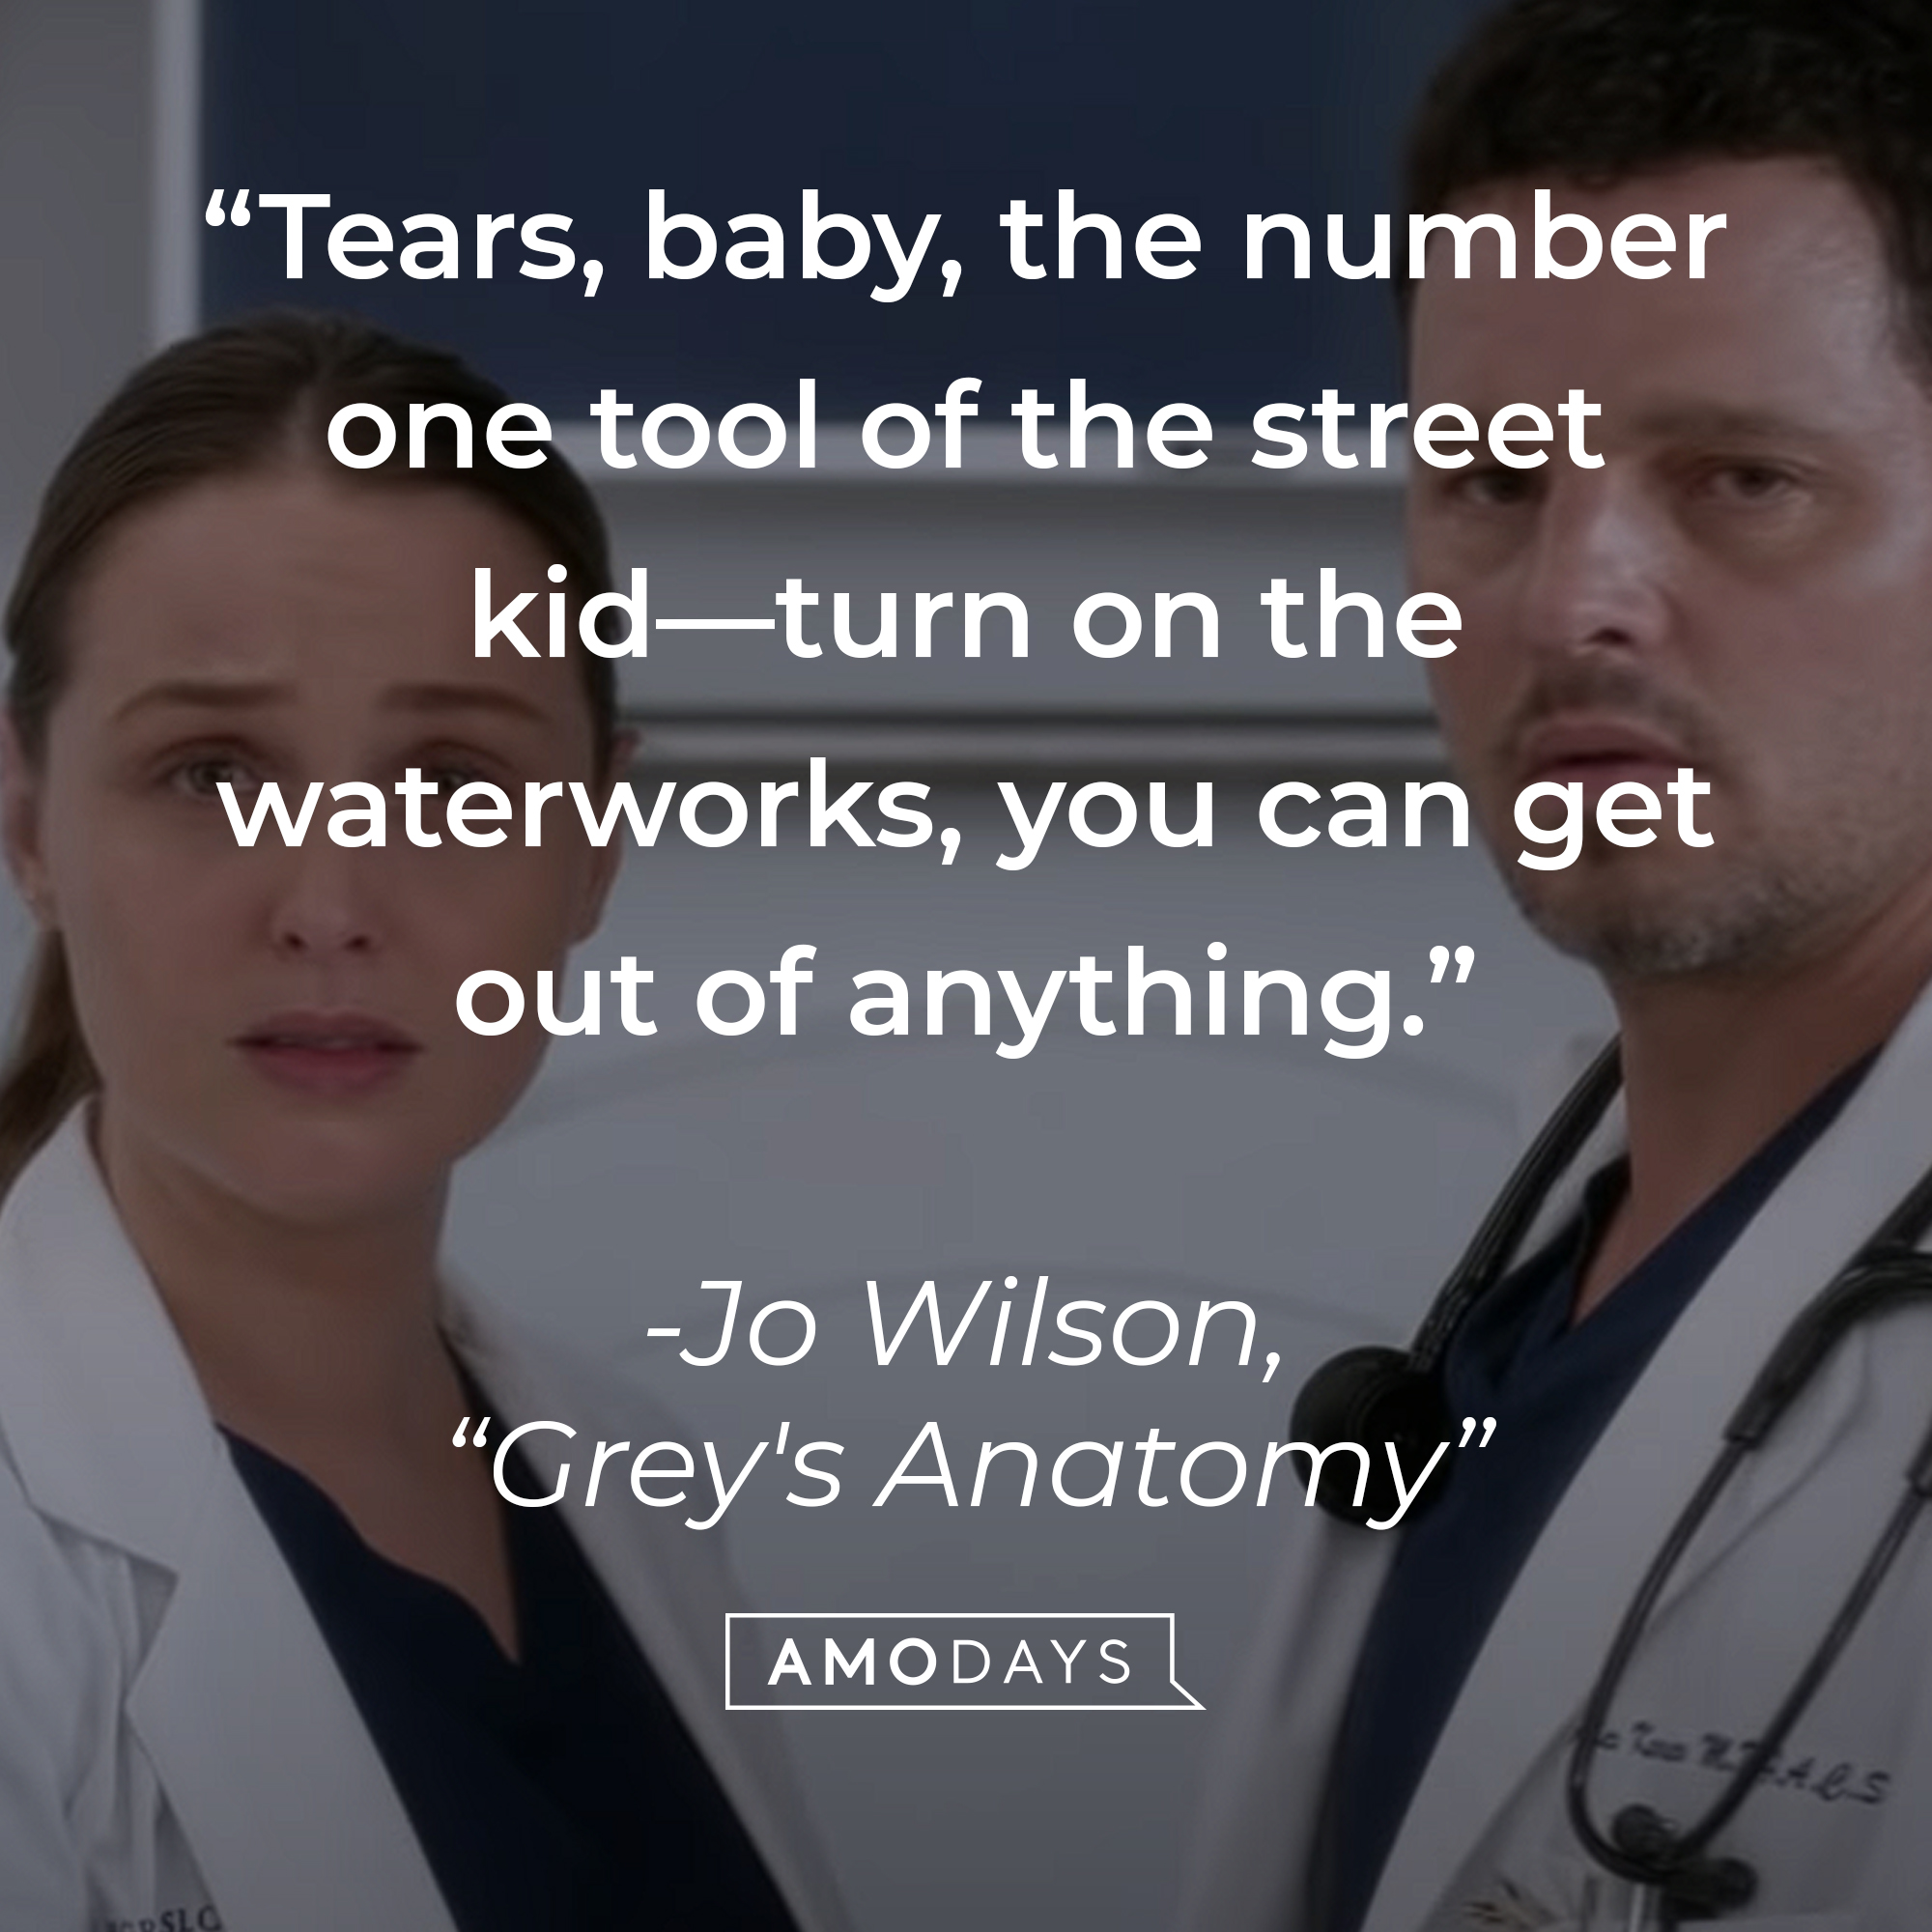 Jo Wilson’s quote from “Grey’s Anatomy”: “Tears, baby, the number one tool of the street kid—turn on the waterworks, you can get out of anything.” | Source: youtube.com/ABCNetwork